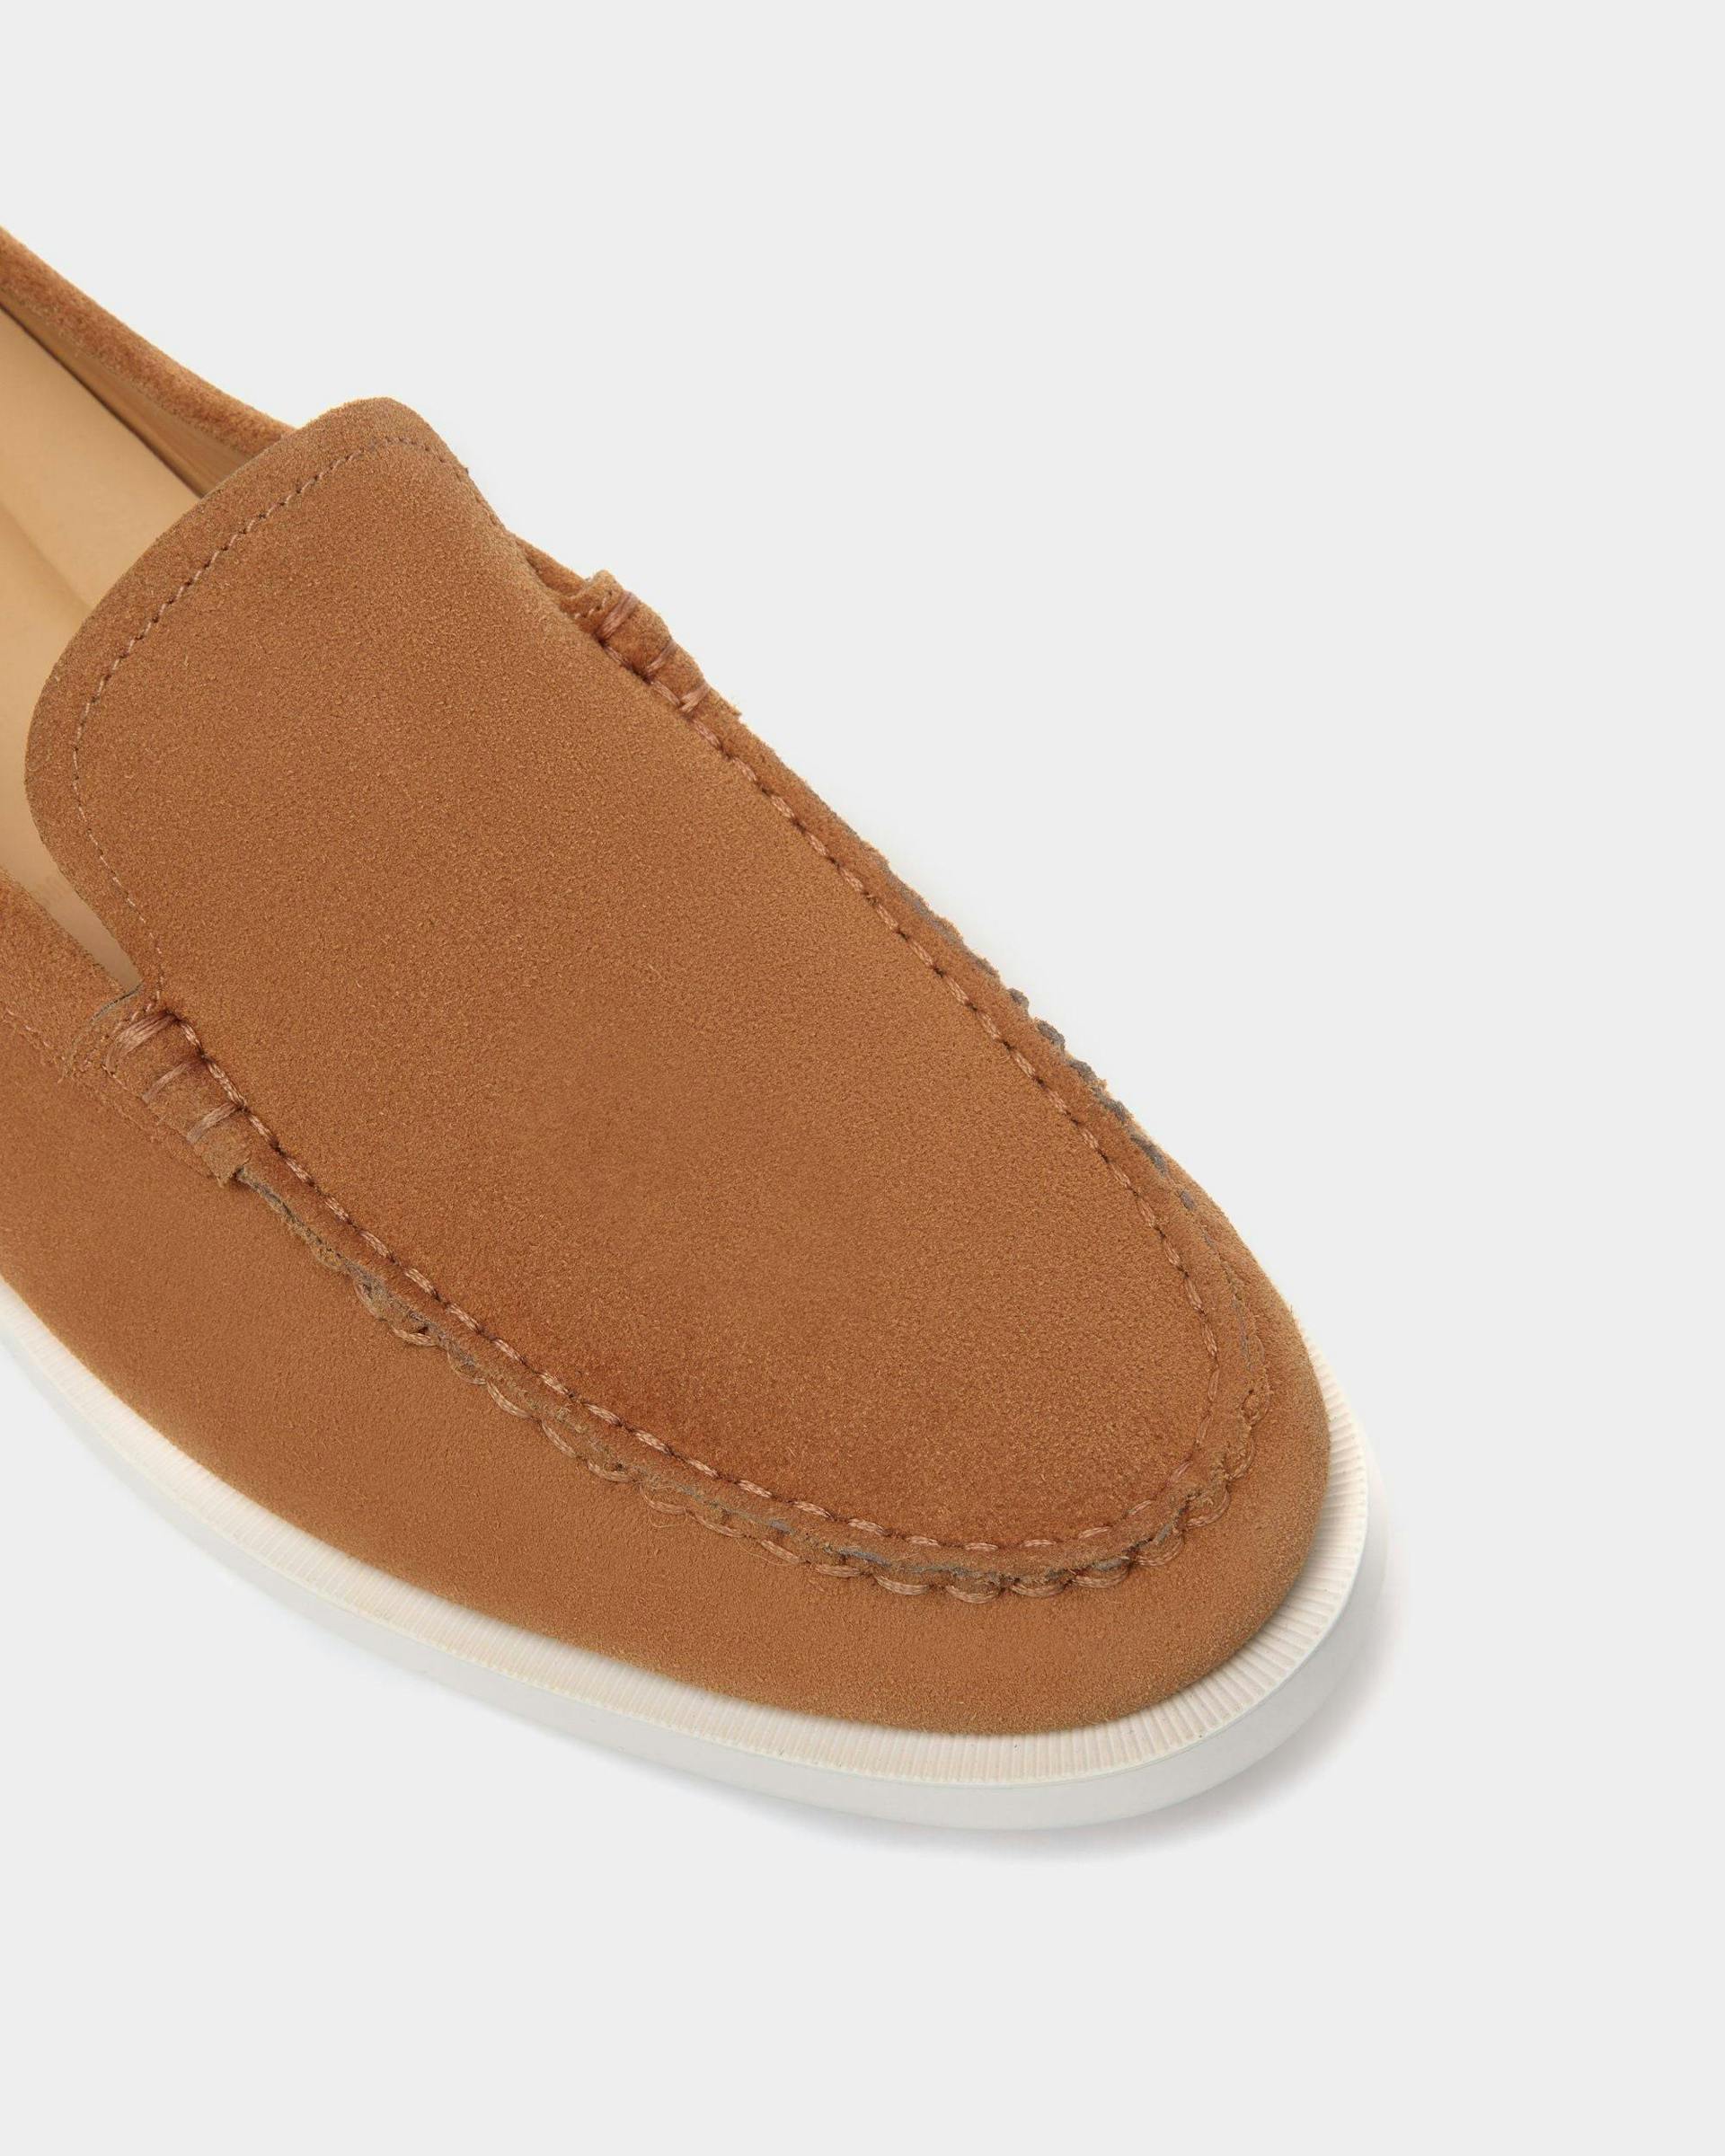 Men's Nelson Loafer in Suede | Bally | Still Life Detail